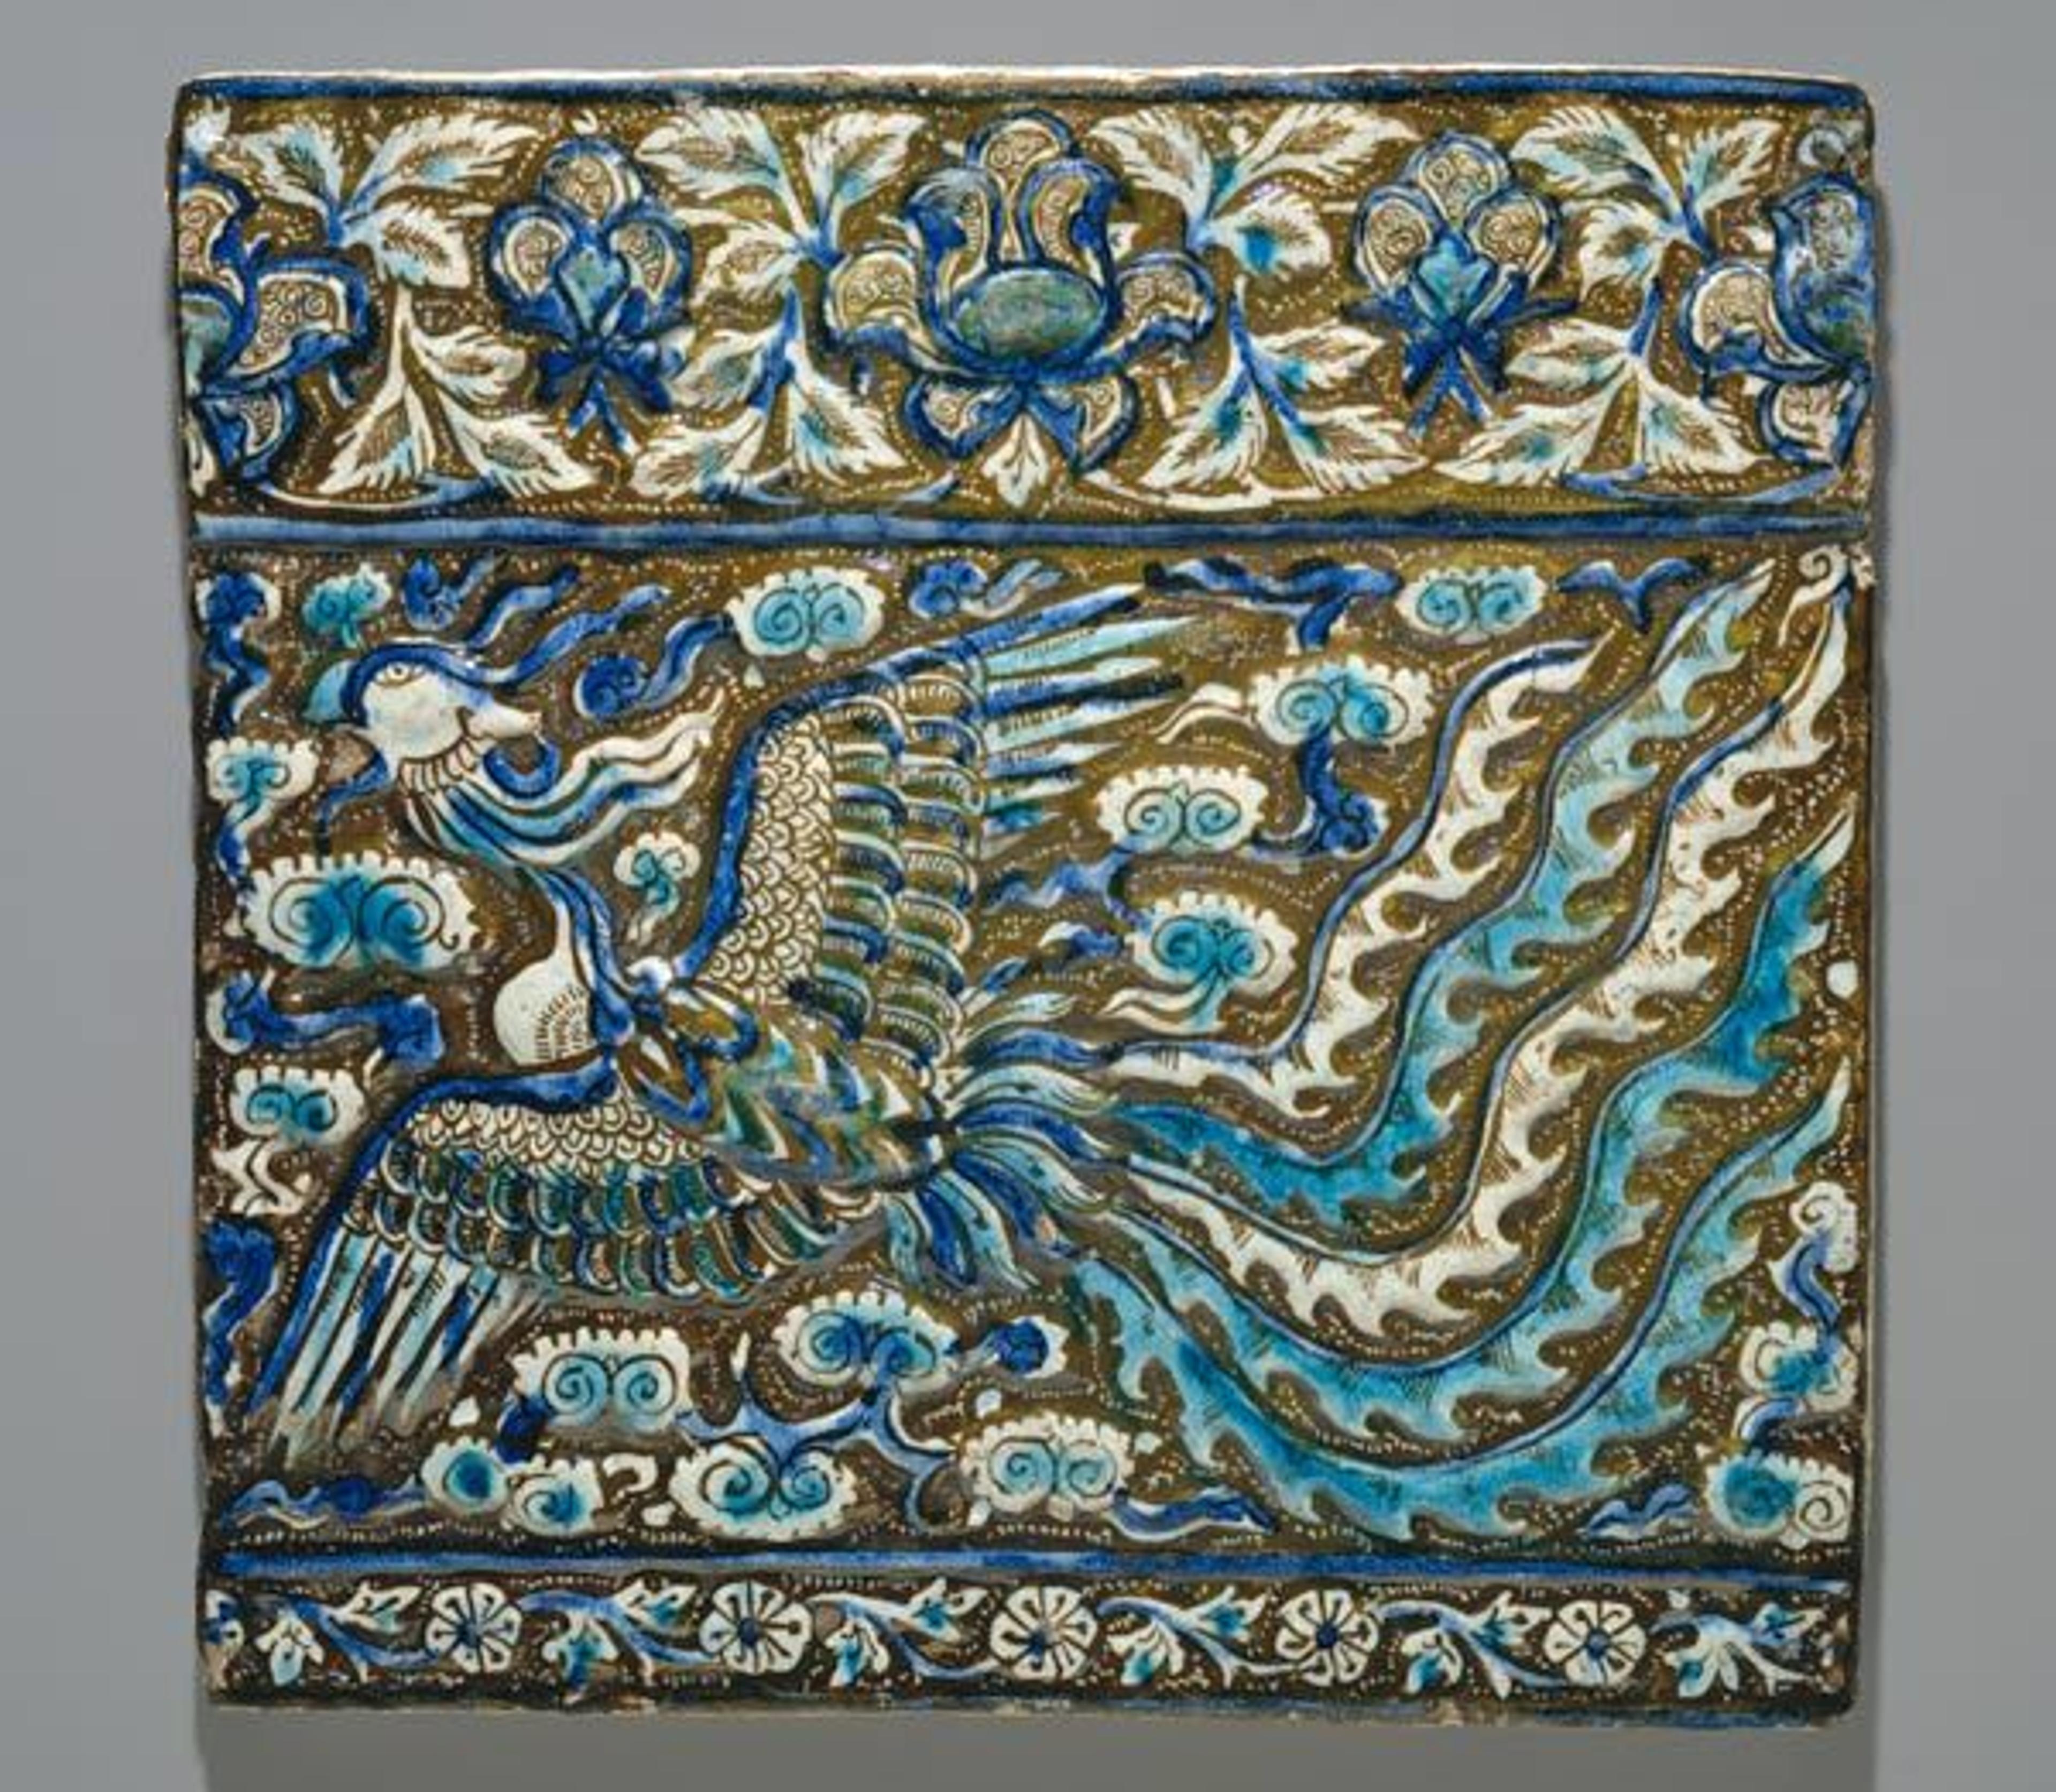 Tile with image of phoenix, late 13th century. Iran, probably Takht-i-Sulaiman. Islamic. Stonepaste; modeled, underglaze painted in blue and turquoise, luster-painted on opaque white ground. The Metropolitan Museum of Art, New York, Rogers Fund, 1912 (12.49.4)